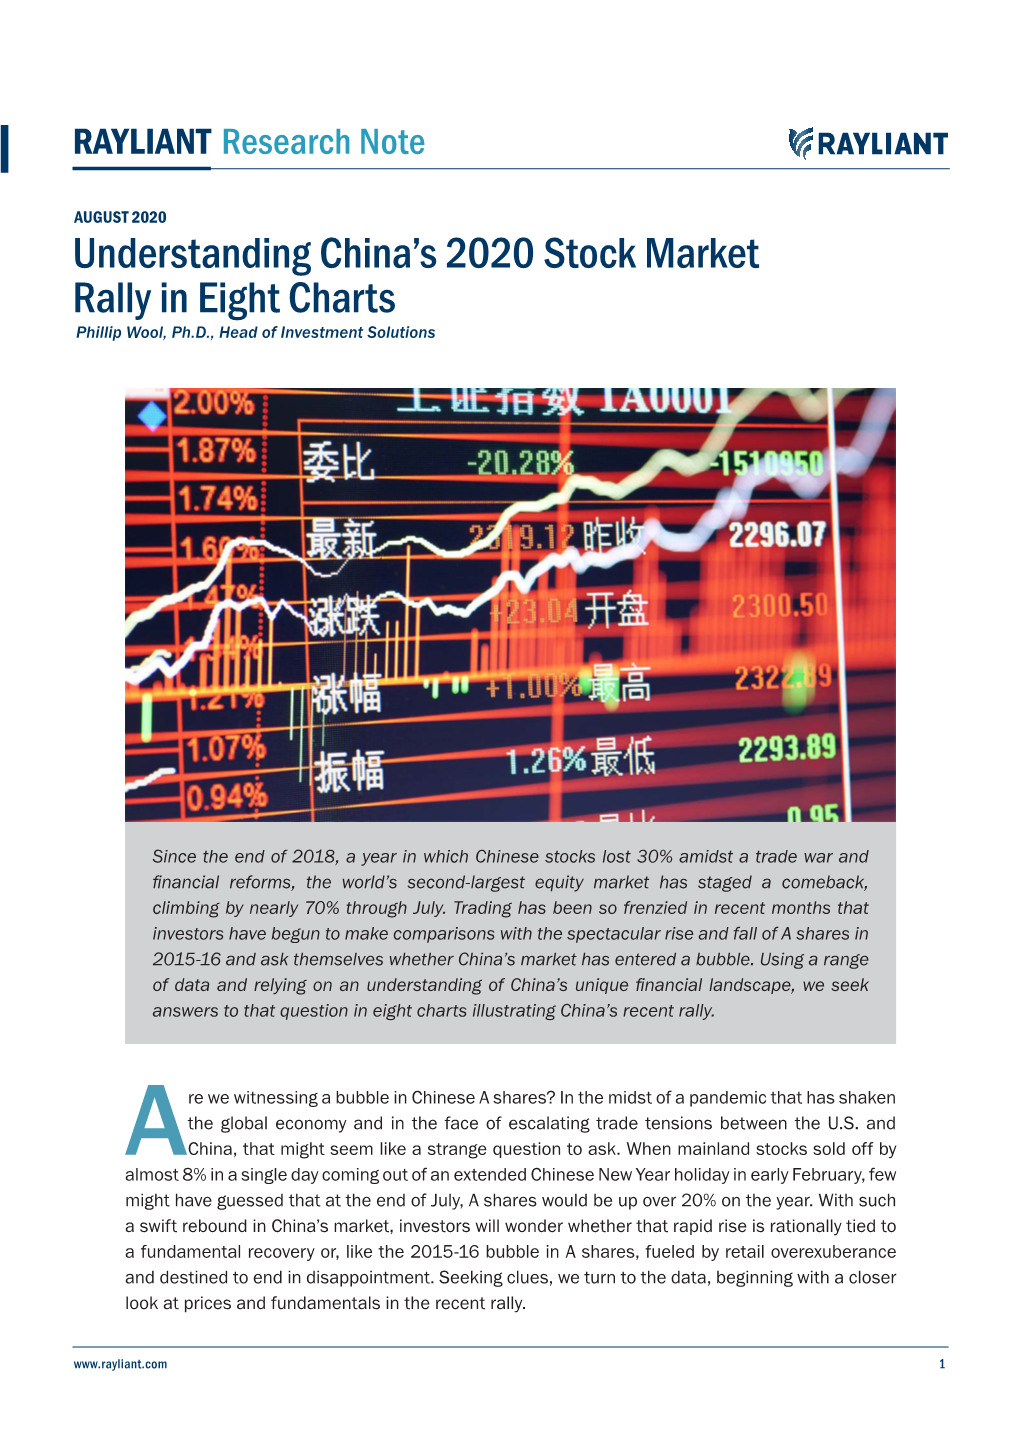 Understanding China's 2020 Stock Market Rally in Eight Charts